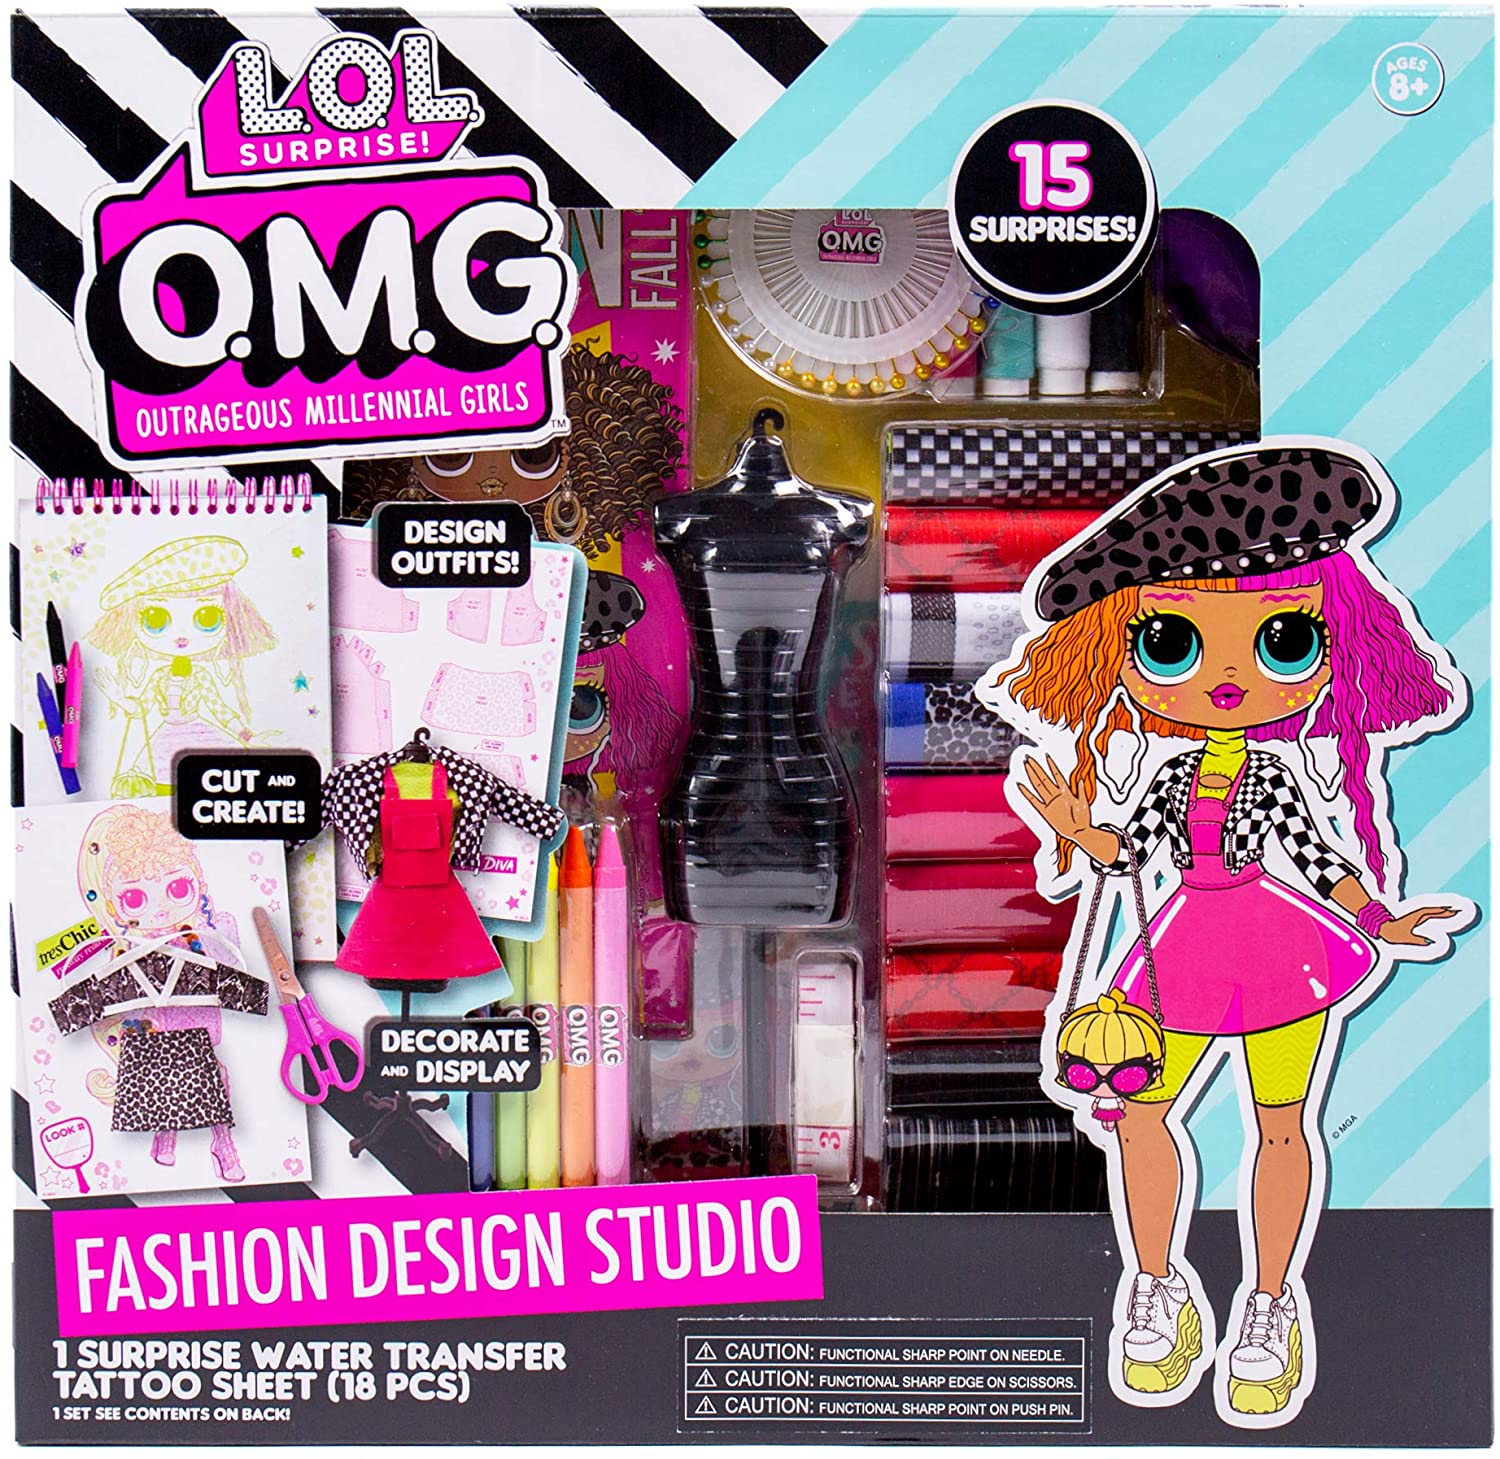 Lol Omg Fashion Design Studio Diy Create Your Own Outfits For Omg